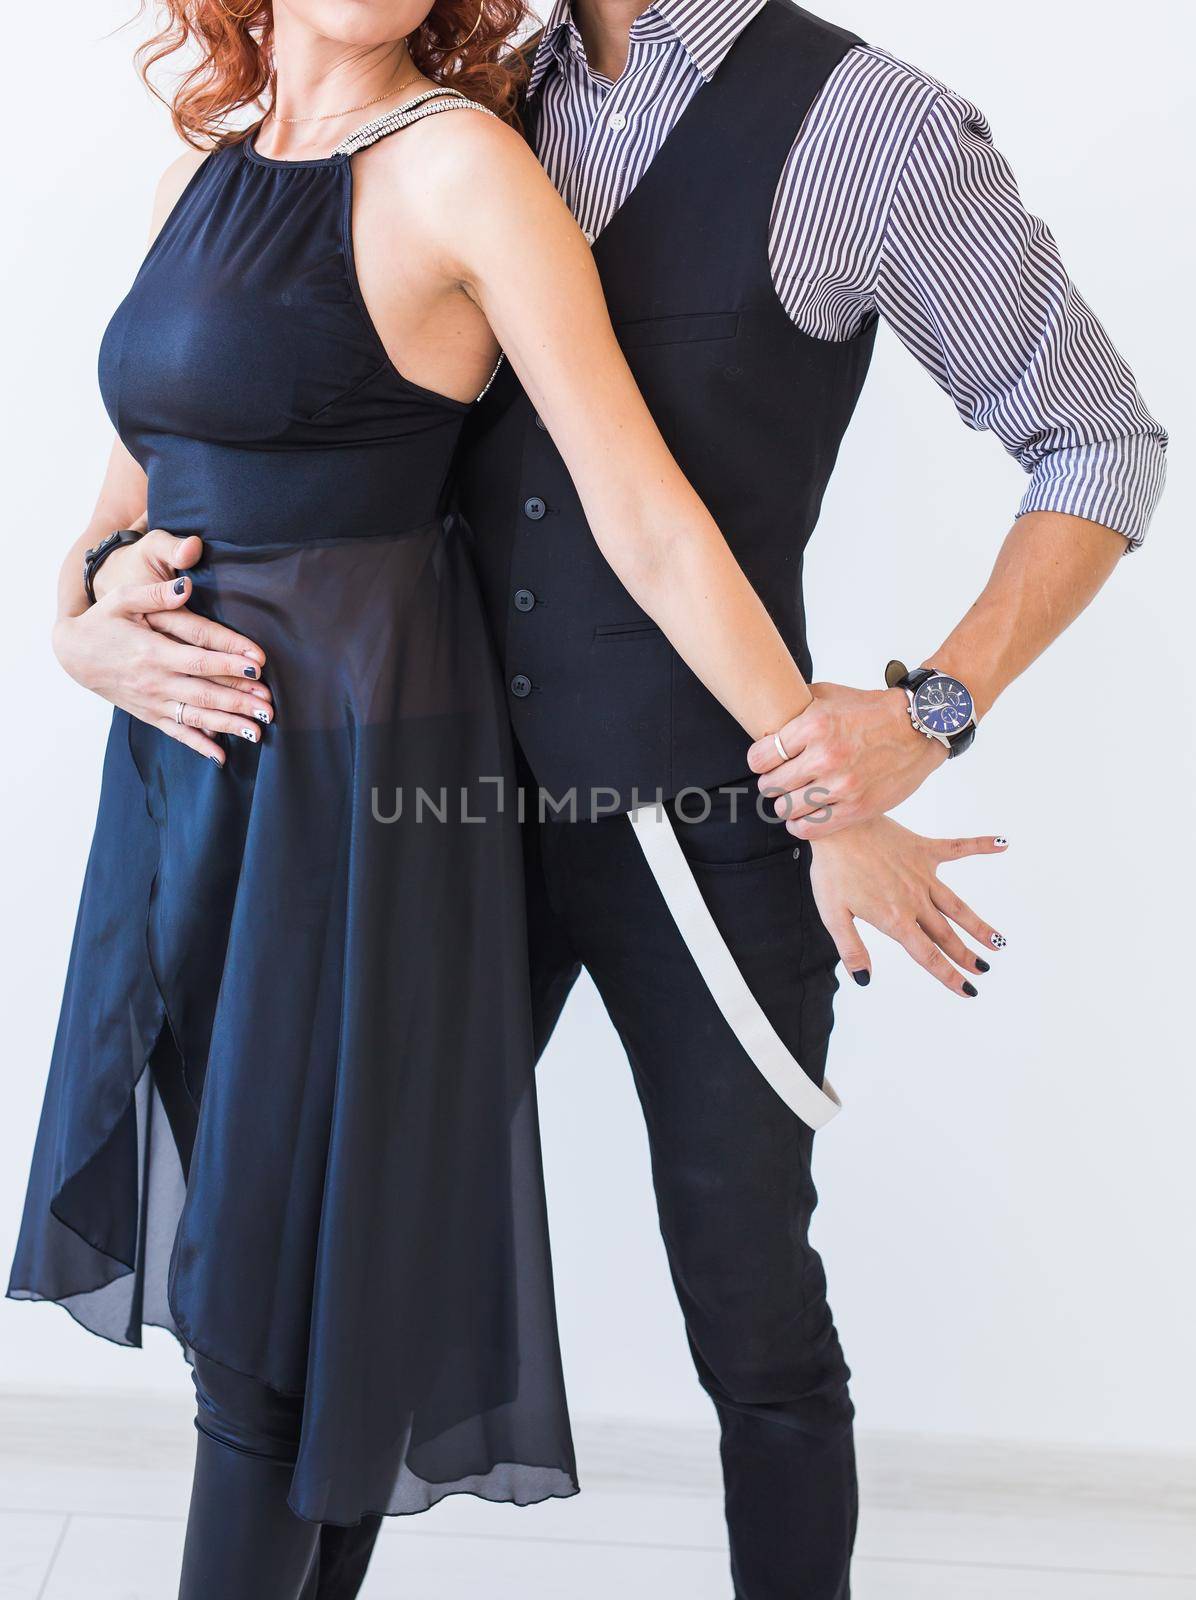 Social dance, kizomba, tango, salsa, people concept - close up of beautiful couple dancing bachata on white background by Satura86